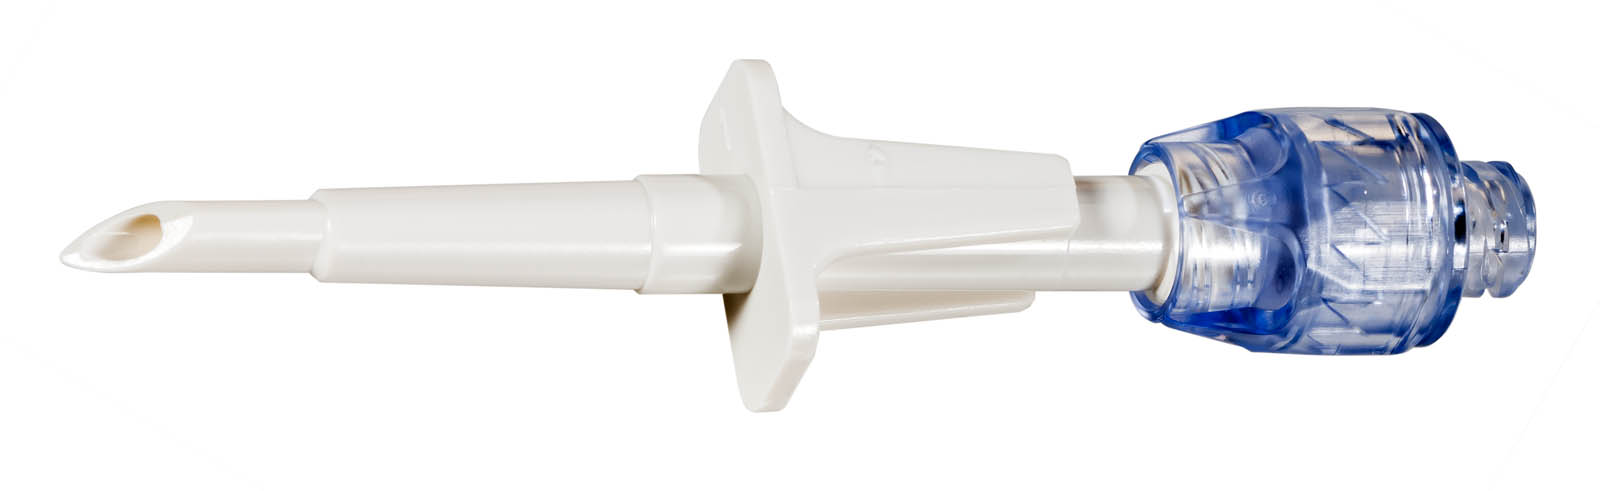 Needle-free vial access cap with Vadsite